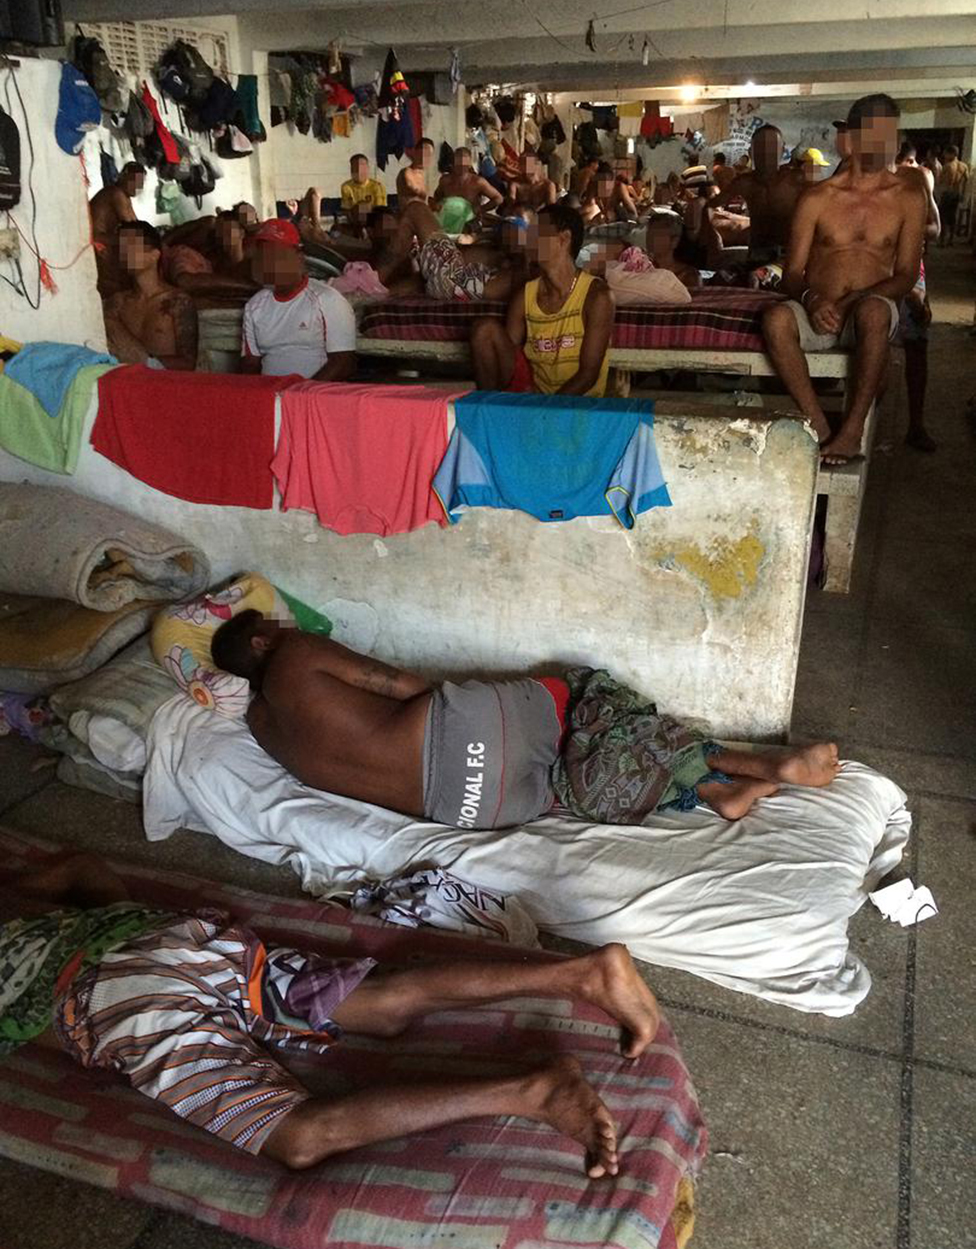 An overcrowded prison in Itamaracá, Brazil, in 2015